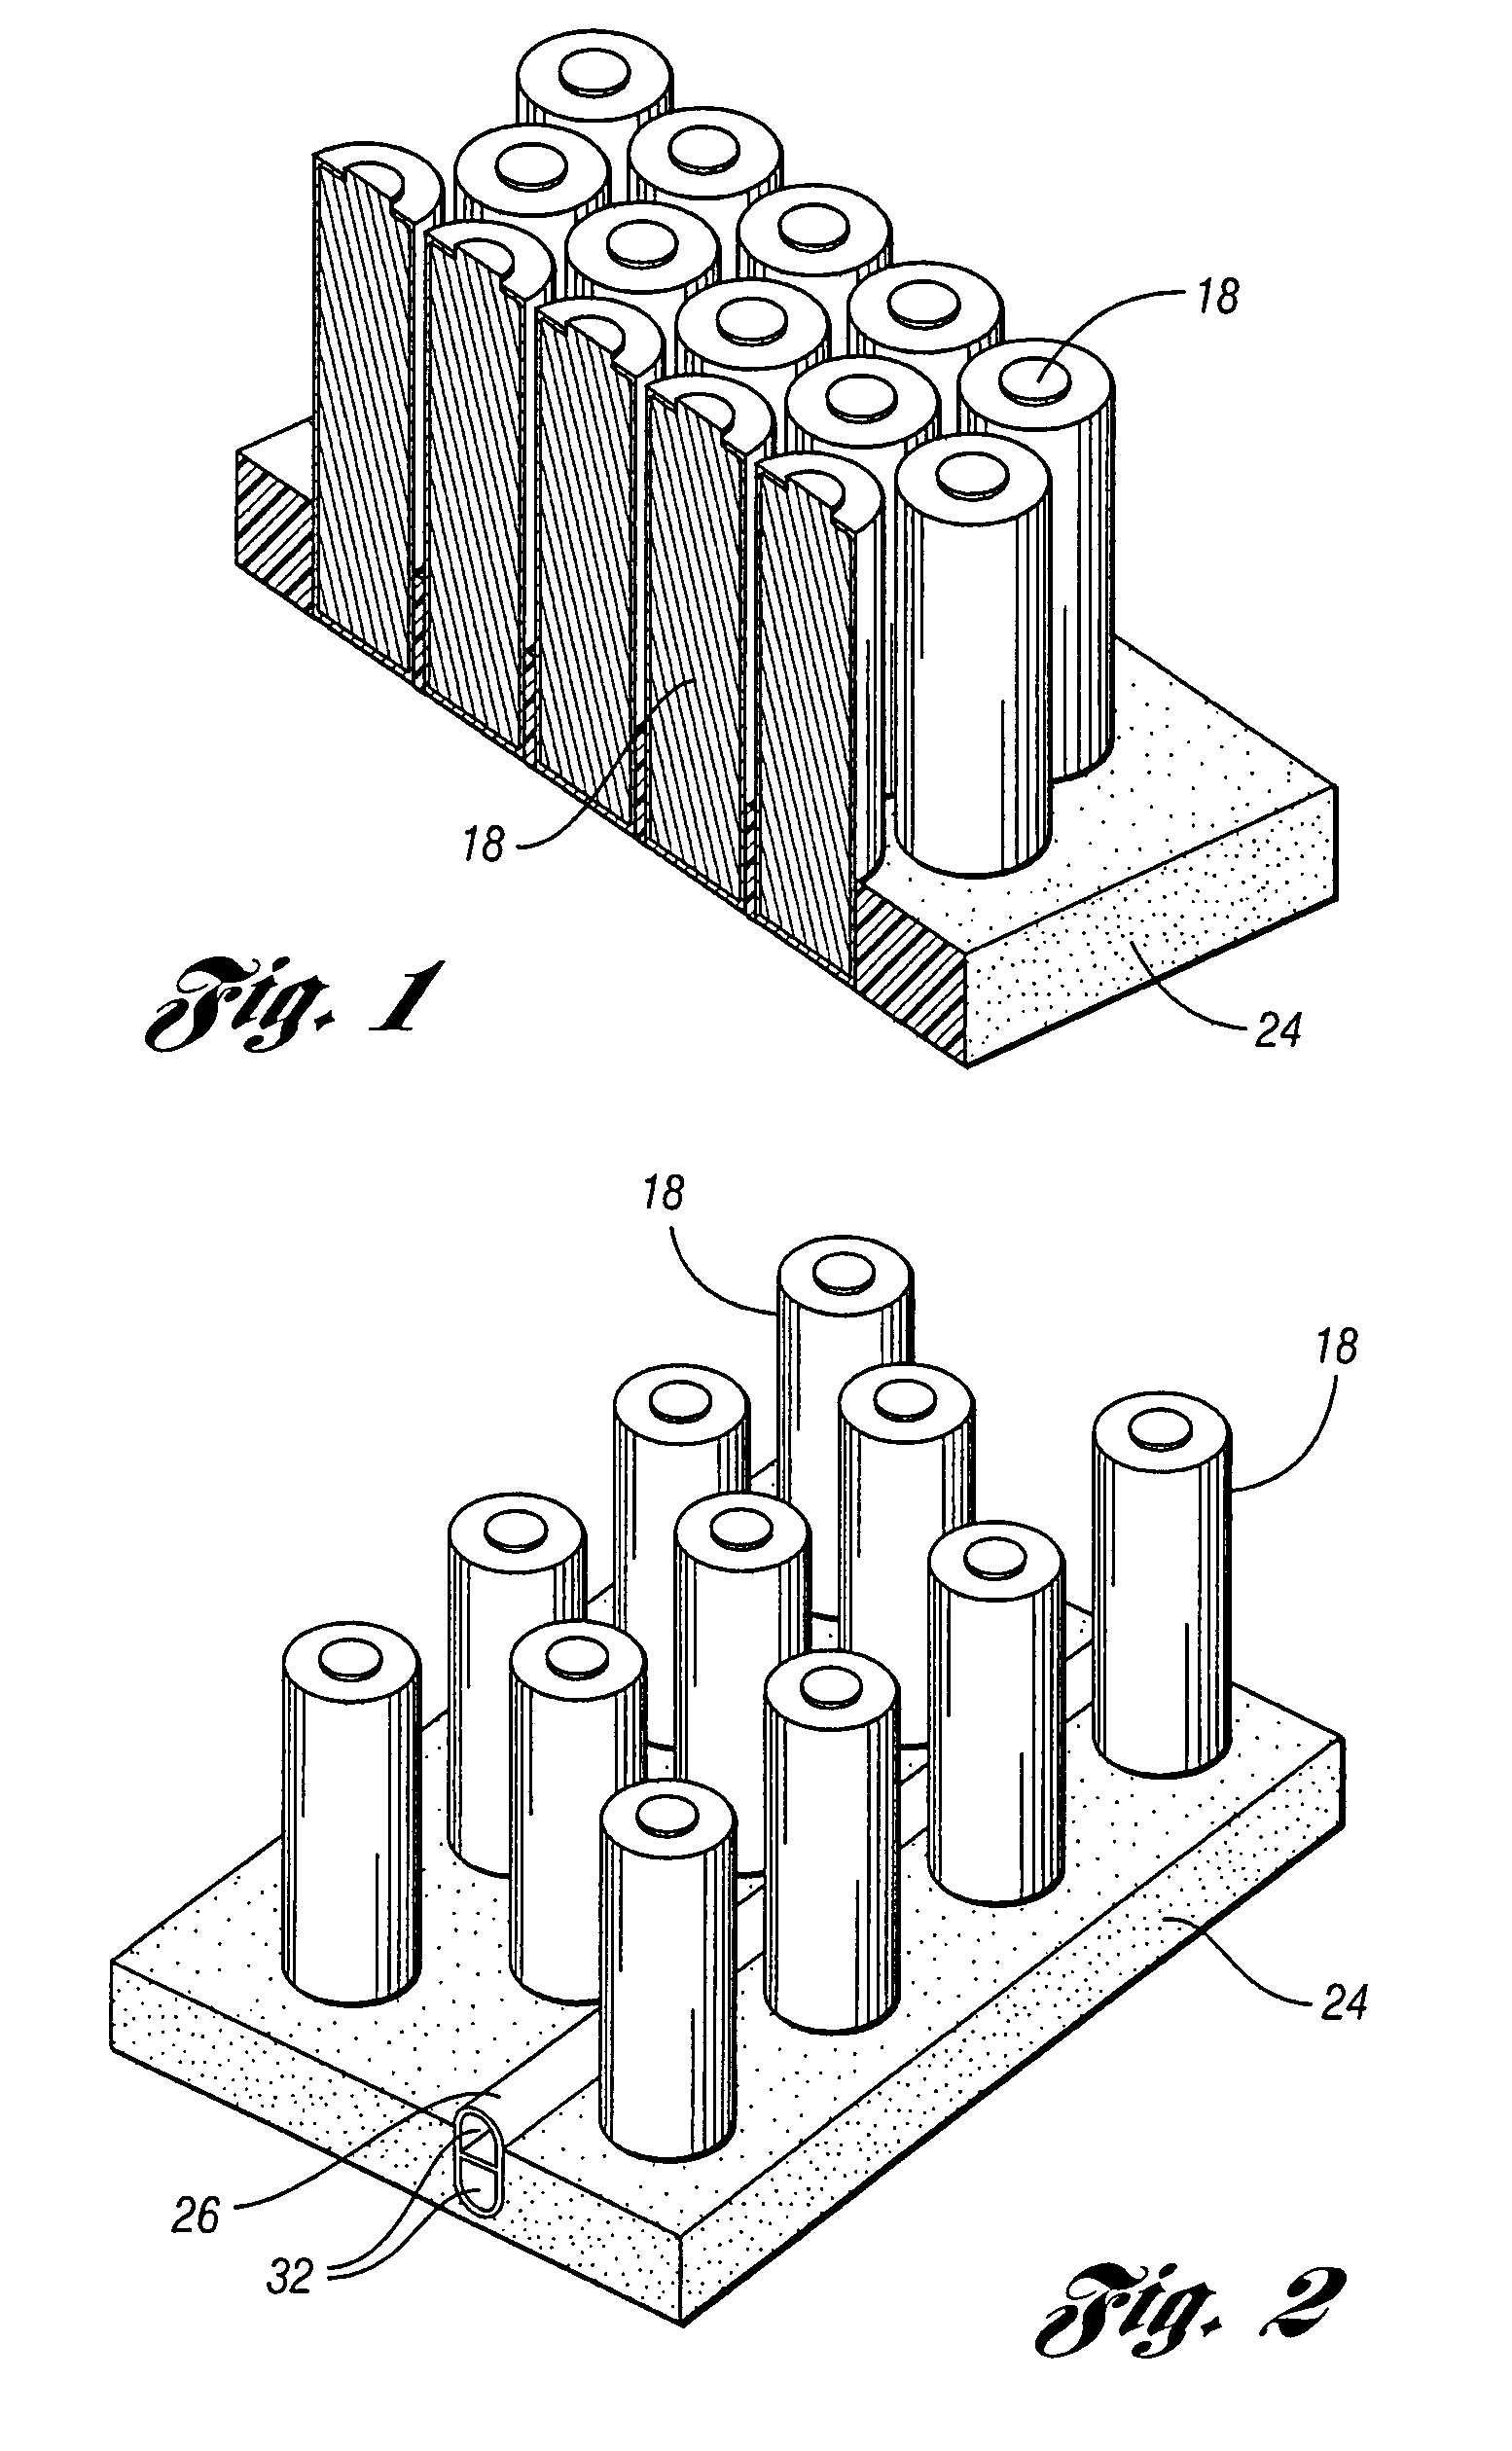 Mitigation of propagation of thermal runaway in a multi-cell battery pack